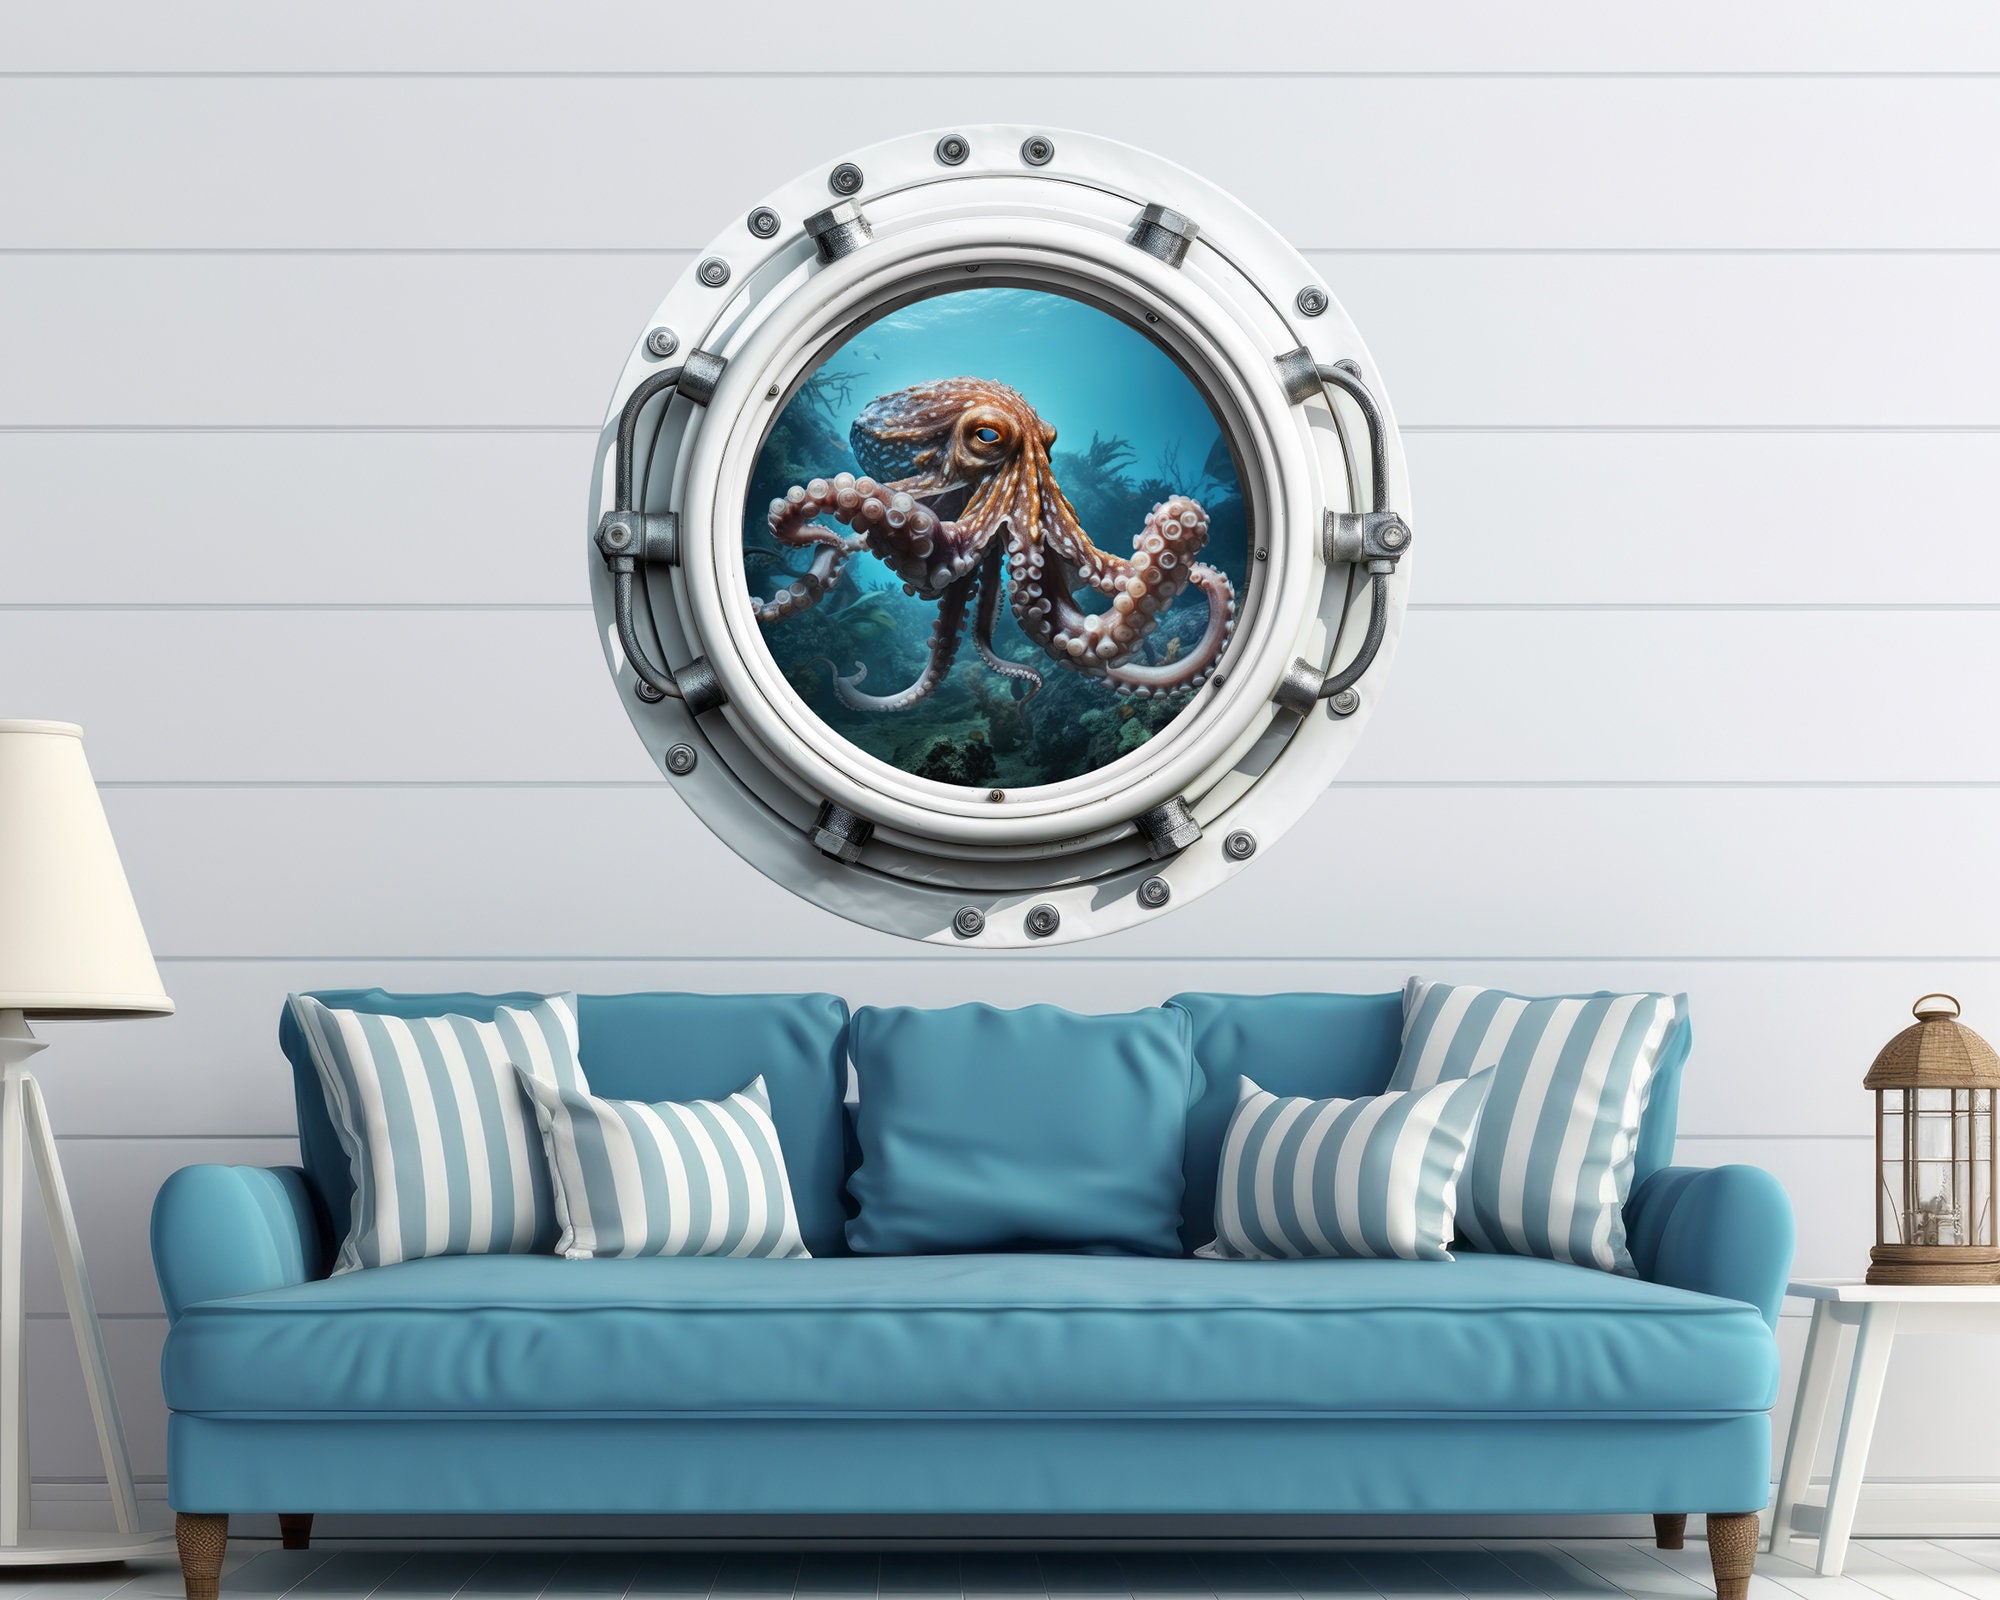  12 Port Scape Instant Sea Porthole Window Sunken Ship 1 Wall  Sticker Graphic Decal Kids Game Room Decor Art Cling New : Tools & Home  Improvement